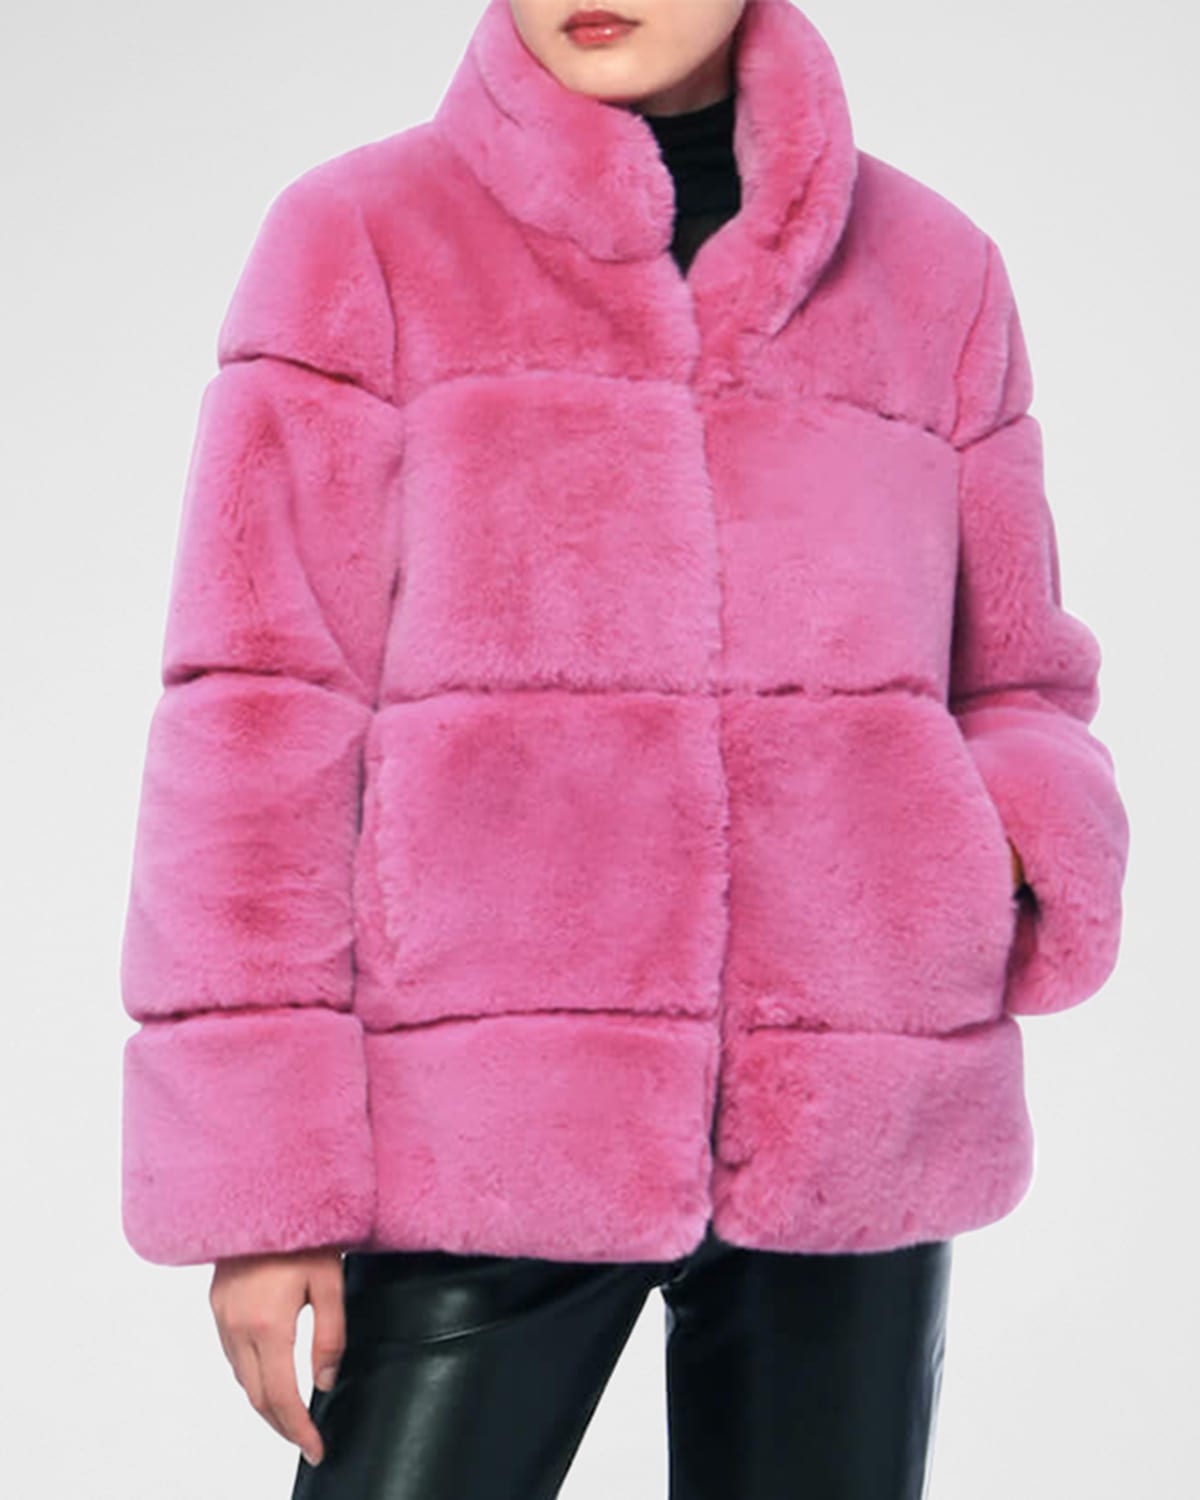 Women Casual Faux Fur Stitching Parka Slim Fit Stand Collar Cotton Coat